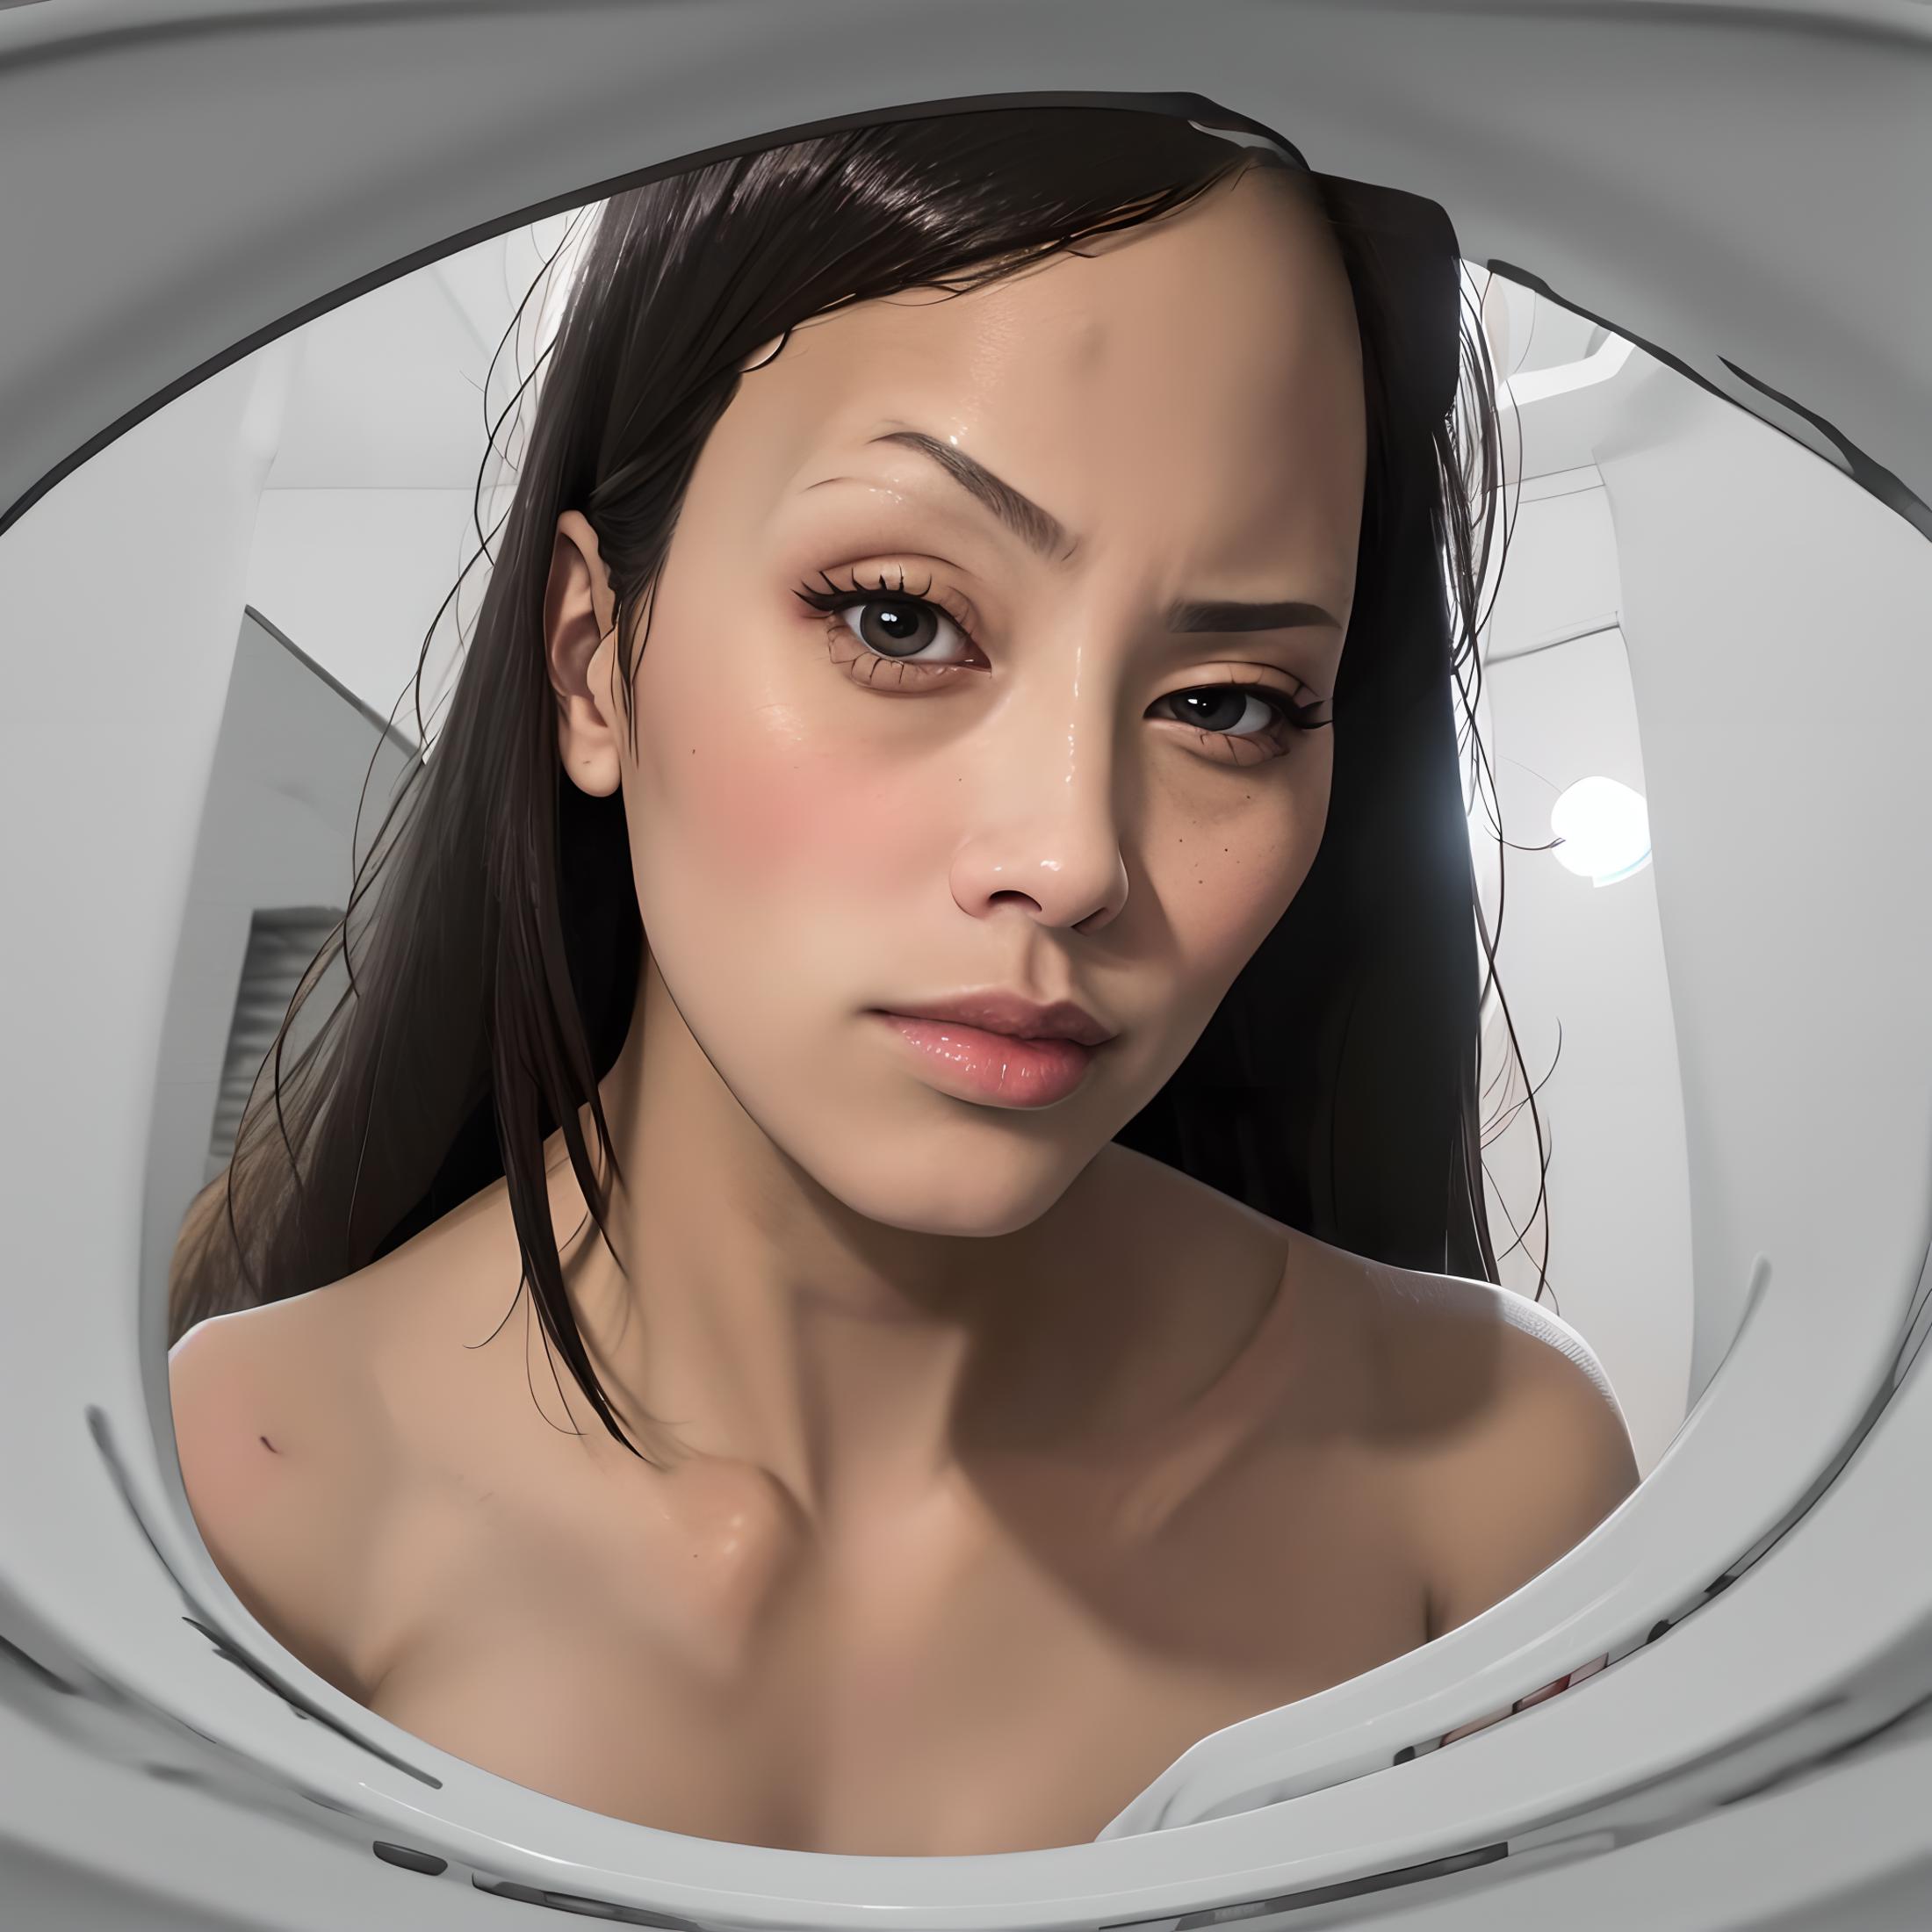 AI model image by dttiger